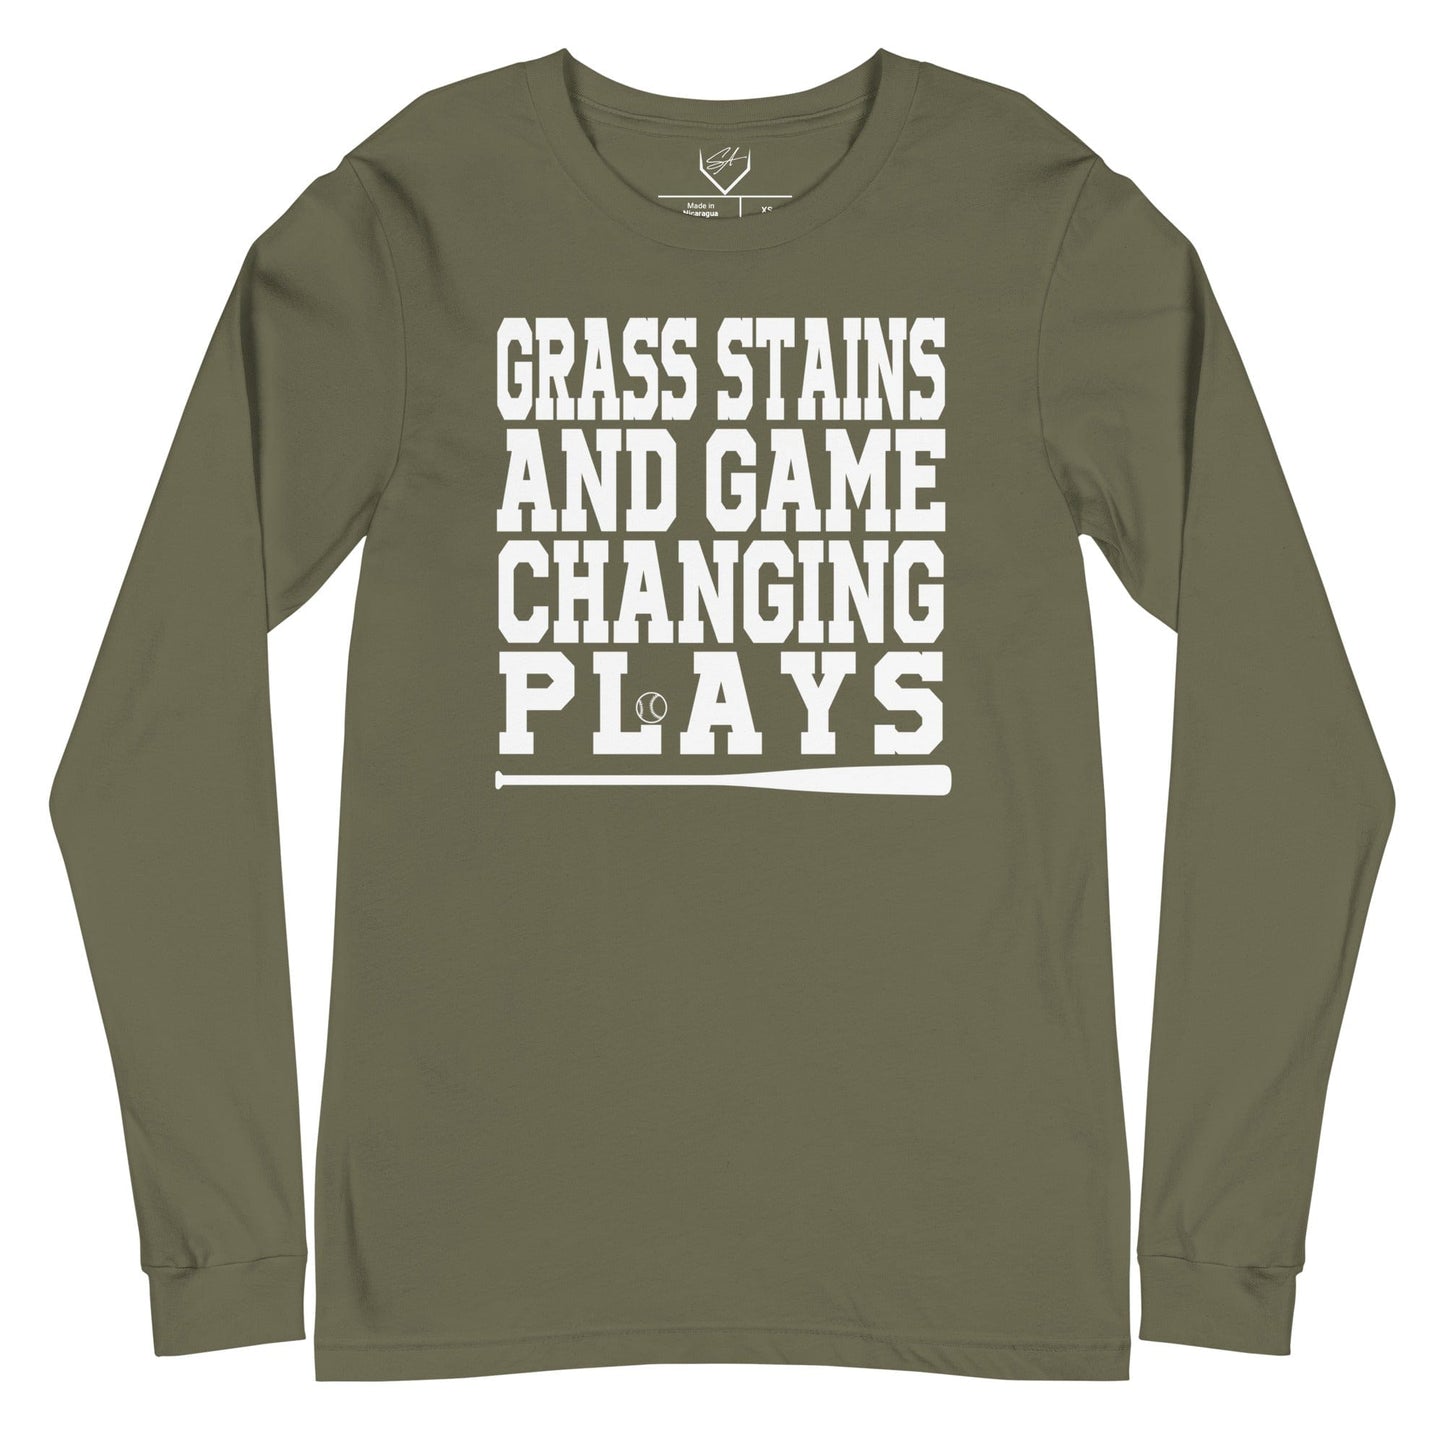 Grass Stains And Game Changing Plays - Adult Long Sleeve